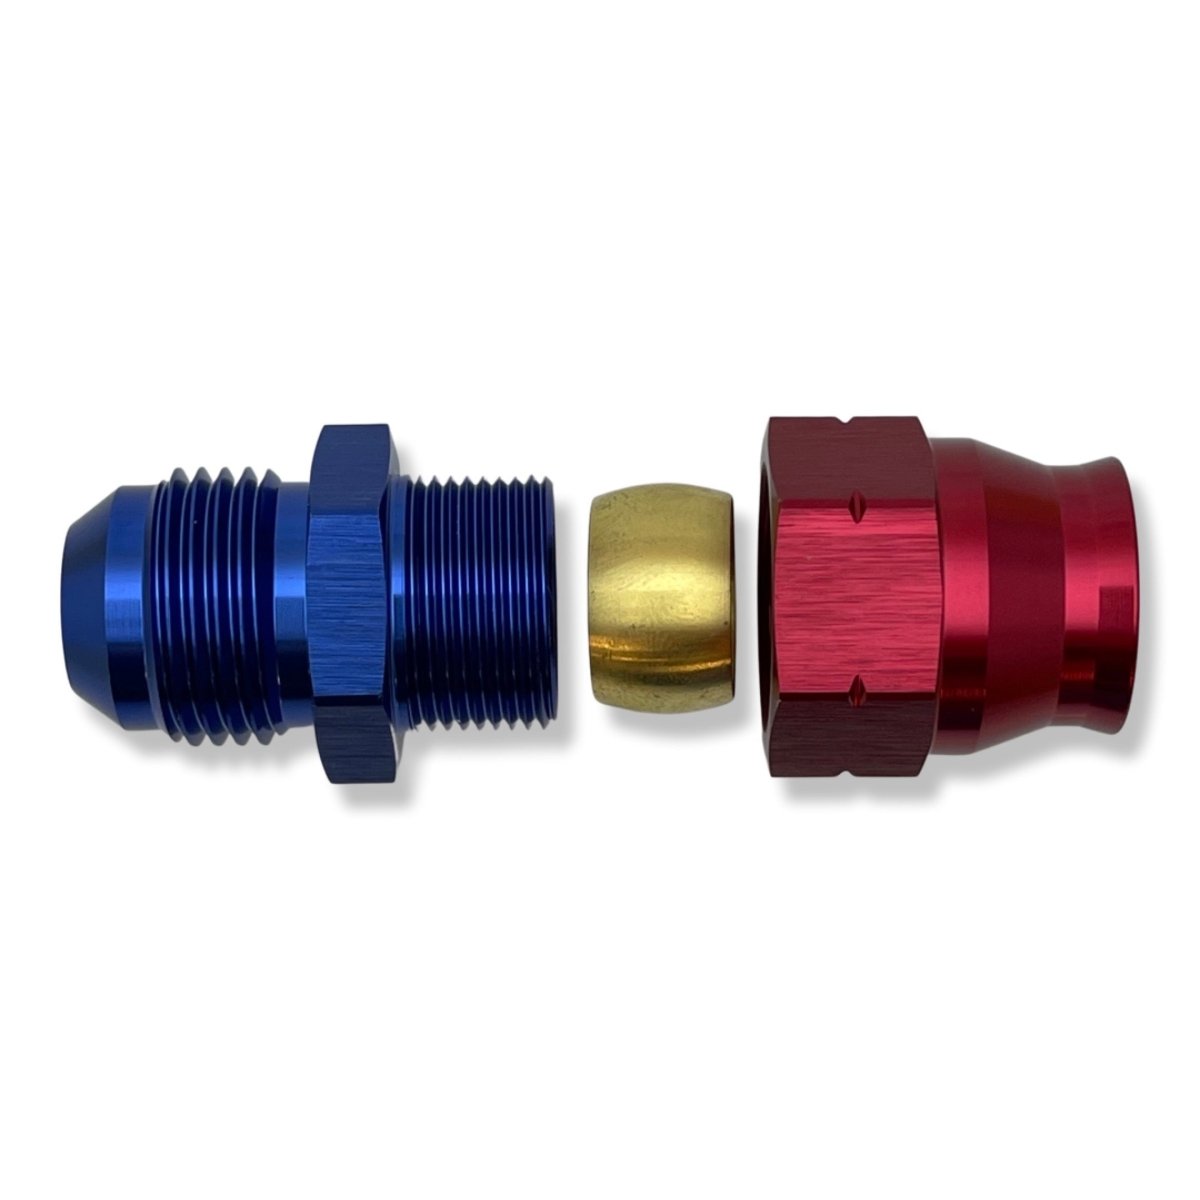 -6 AN MALE TO 3/8" TUBING - RED/BLUE - 165006 by AN3 Parts